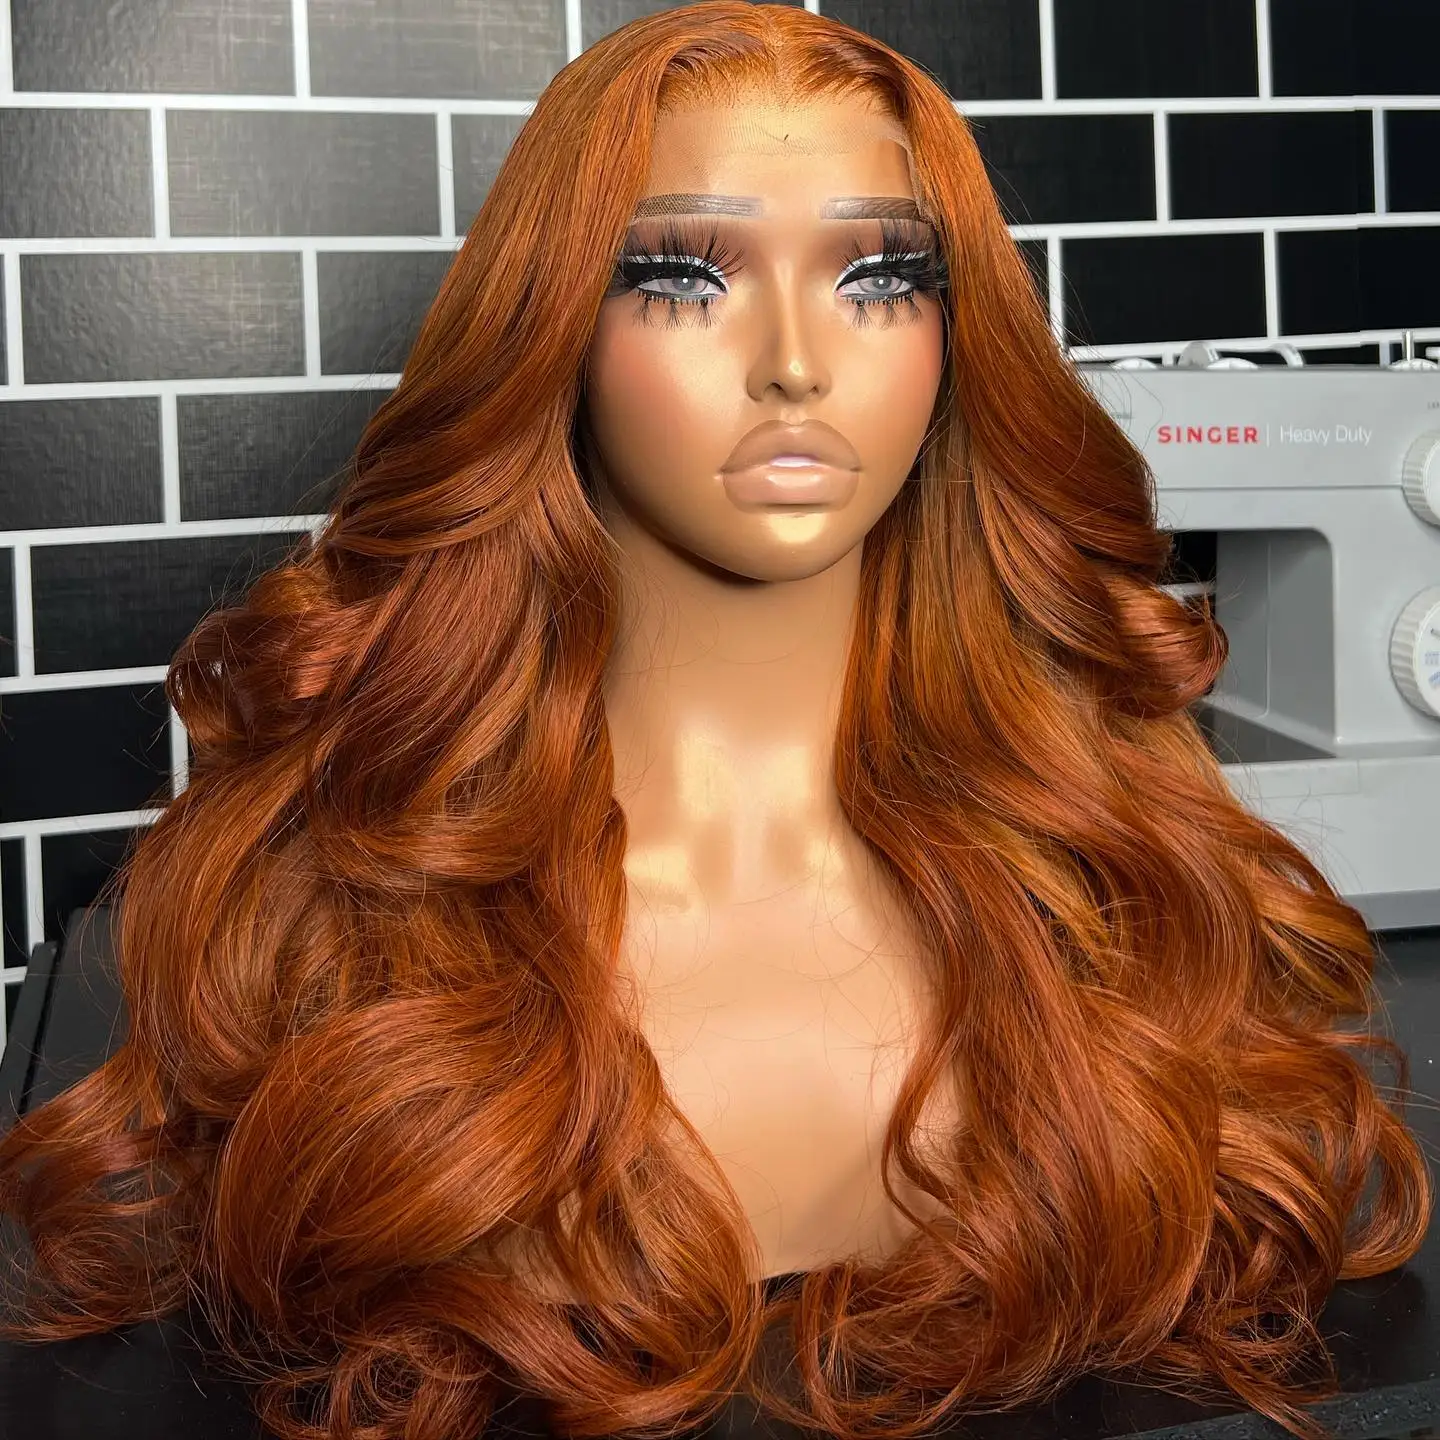 Orange Ginger Body Wave Lace Front Wig Transparent PrePlucked With Baby Hair 13x4 Frontal Wigs Human Hair Wig On Sale Clearance